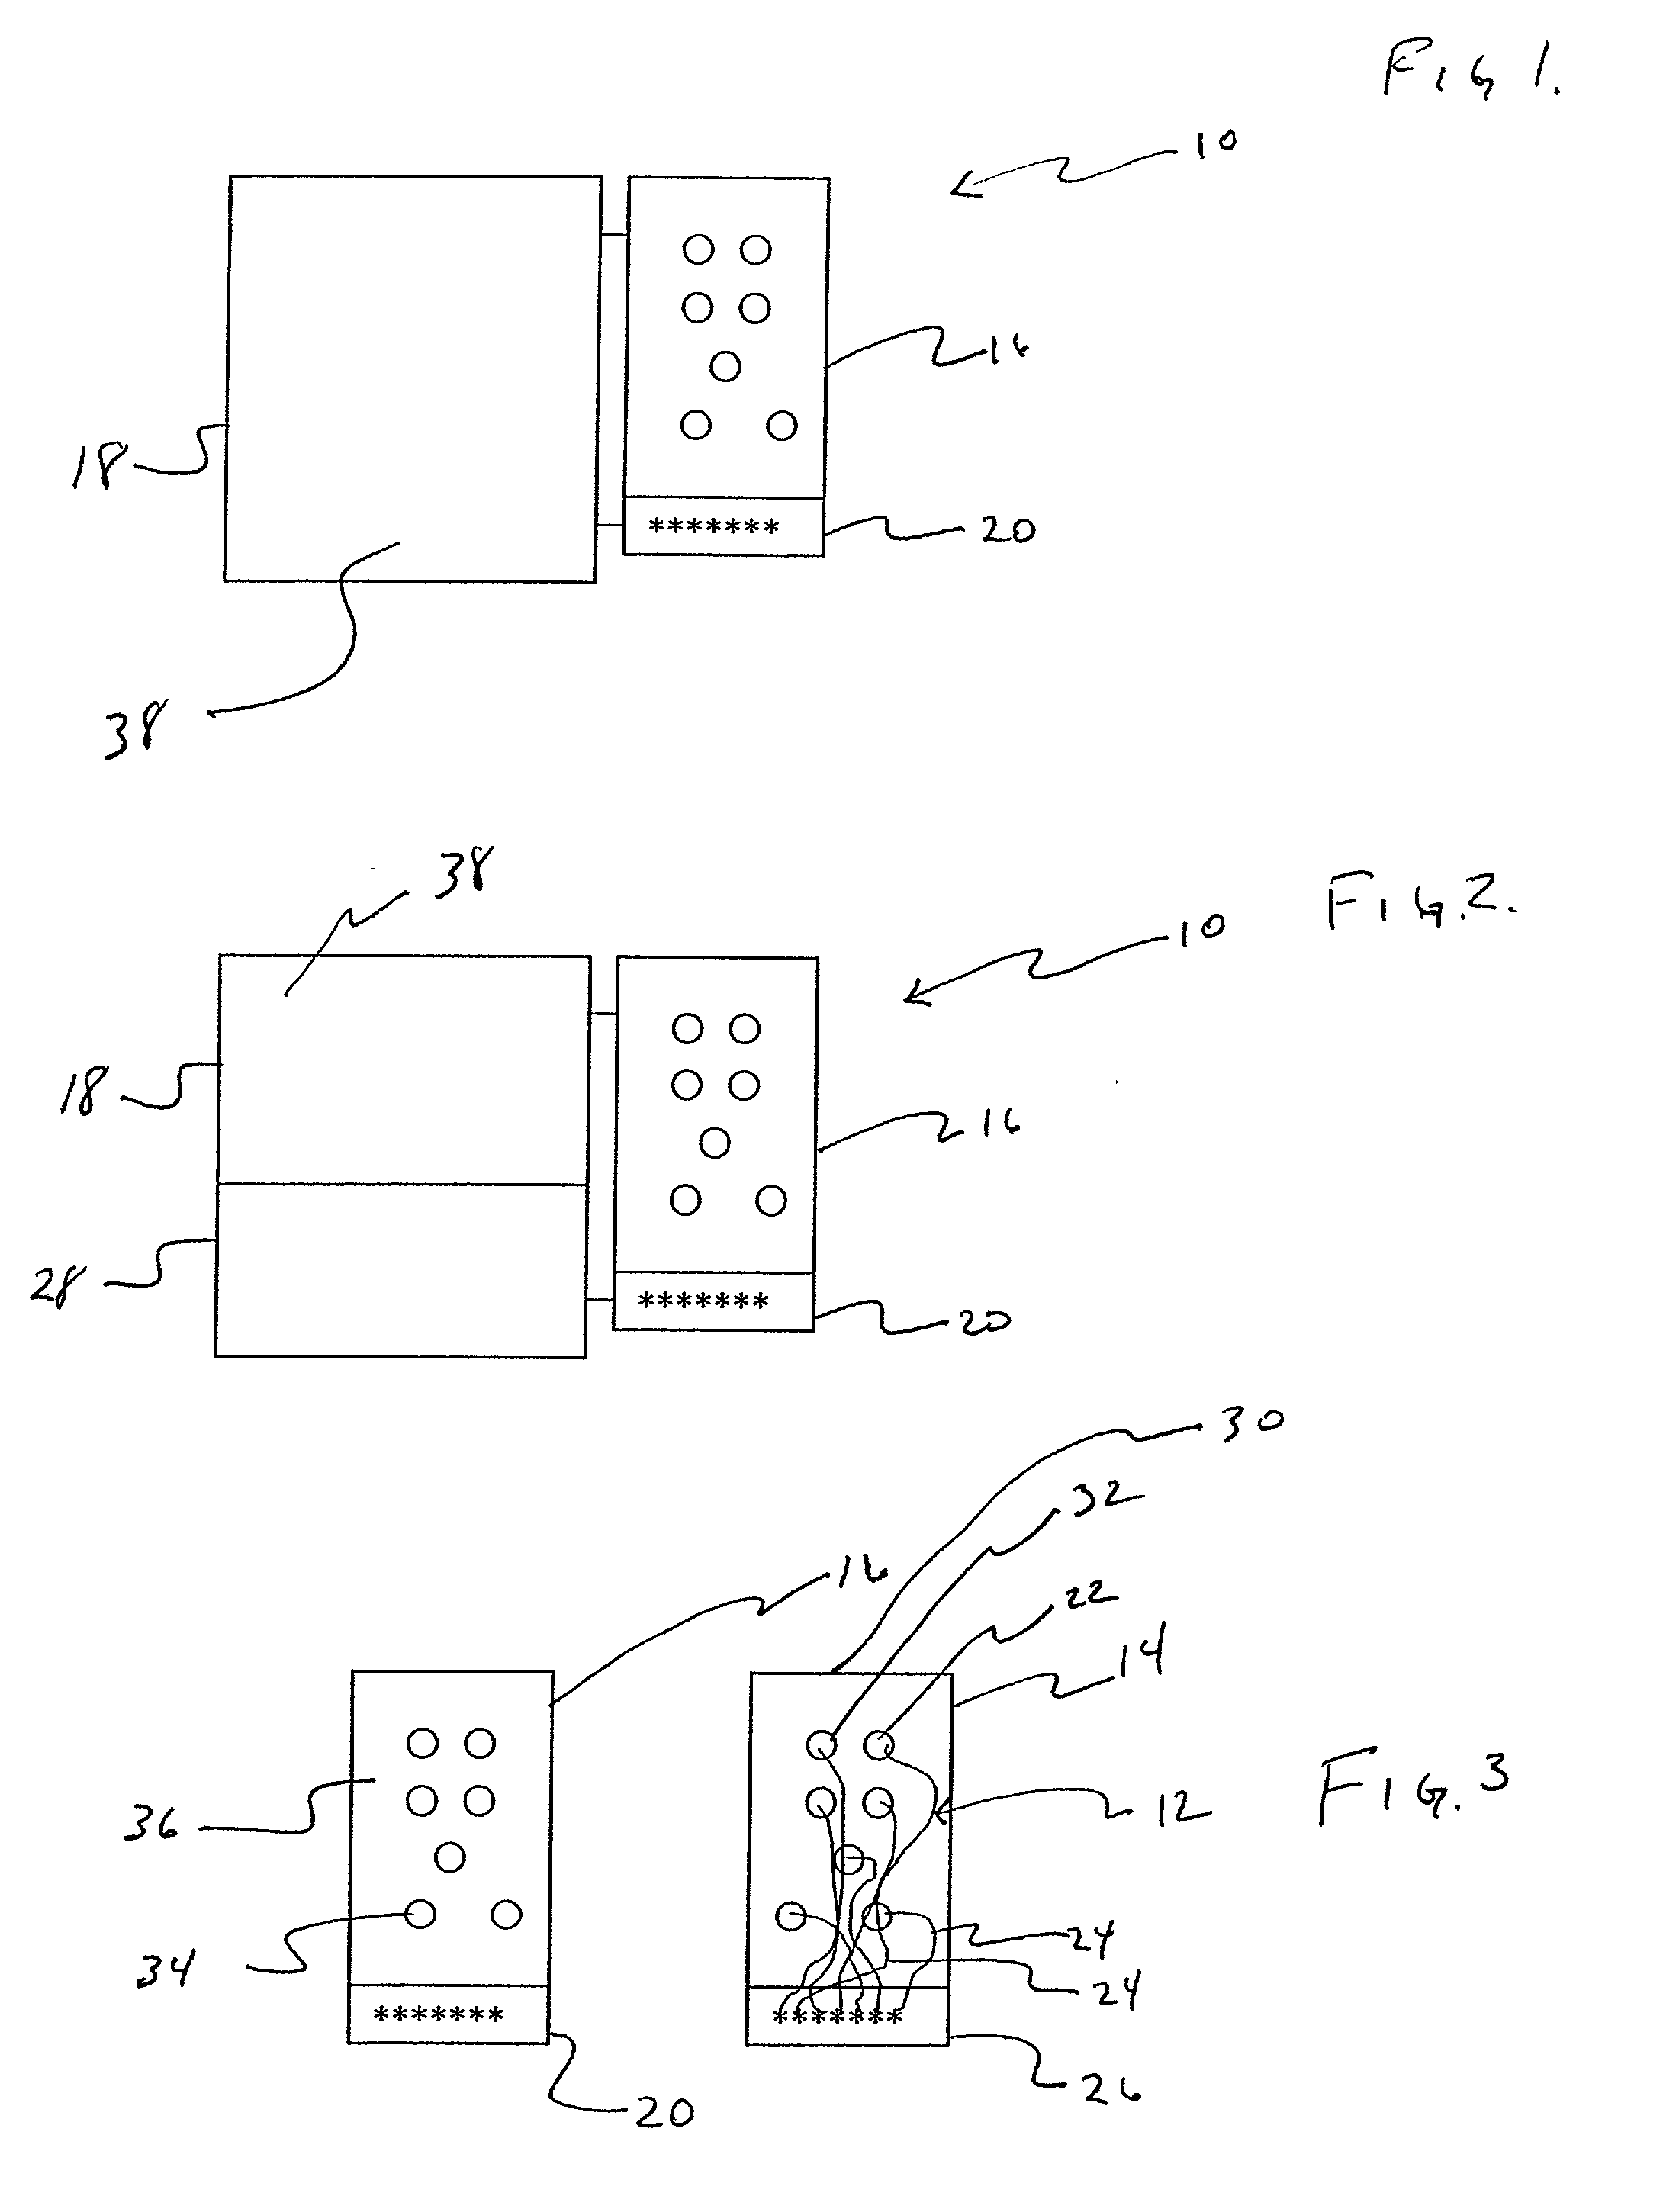 Apparatus and method for detecting lead adequacy and quality